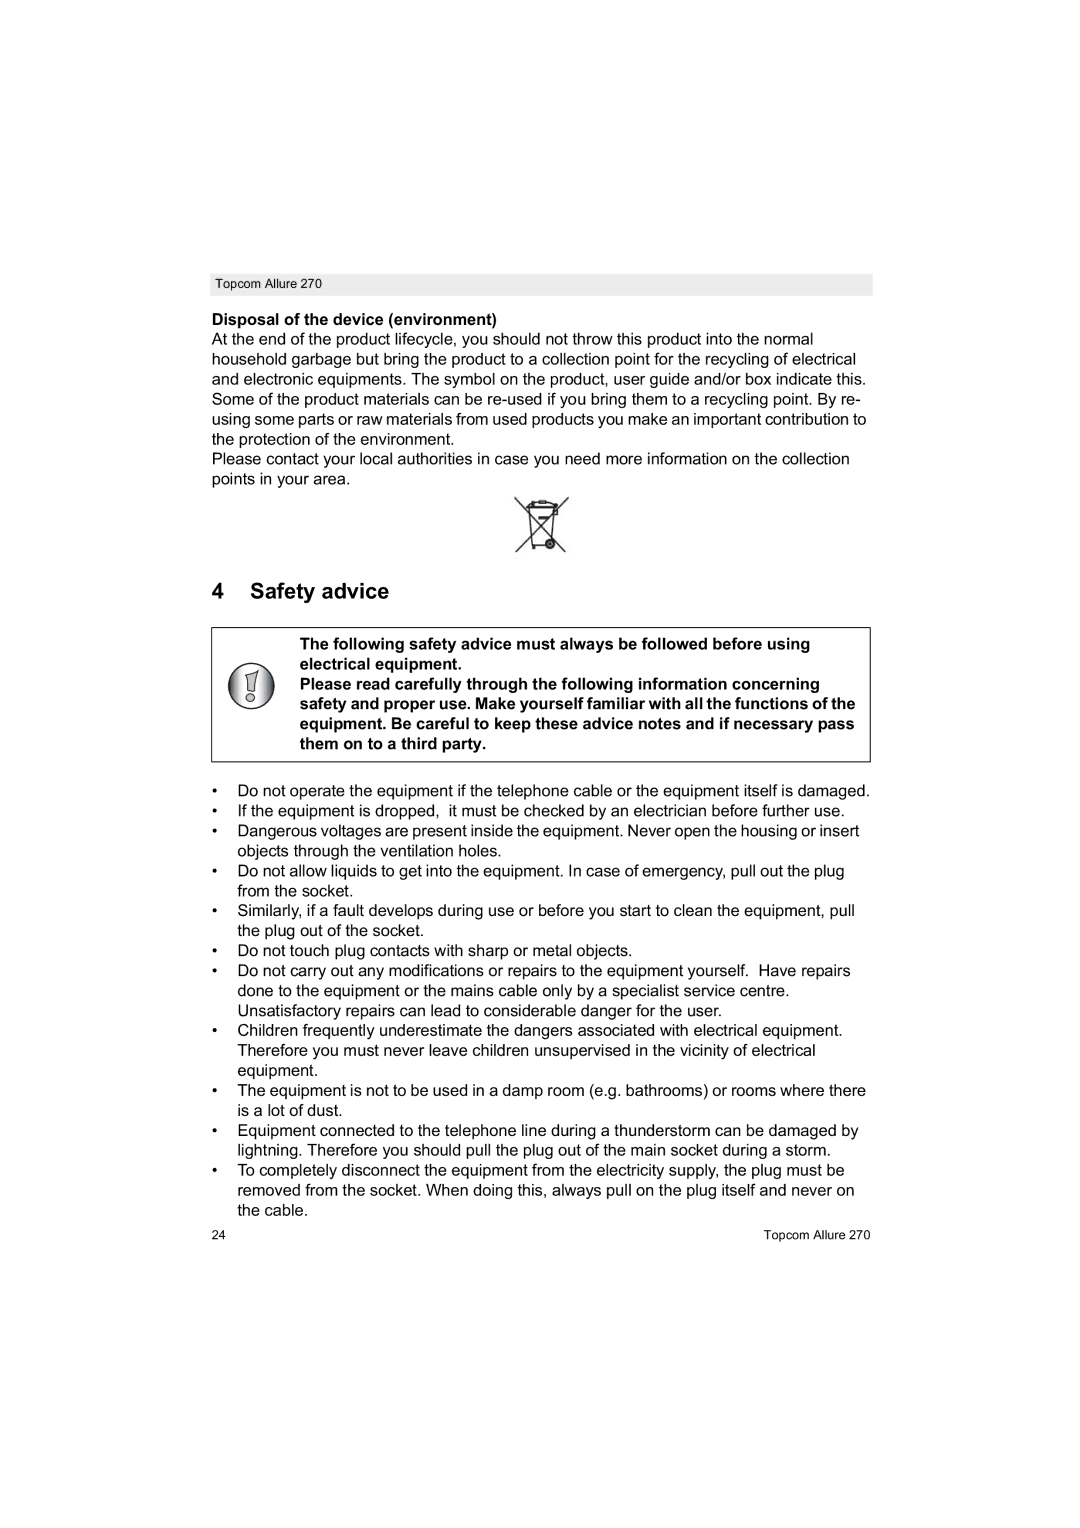 Topcom 270 manual Safety advice, Disposal of the device environment 